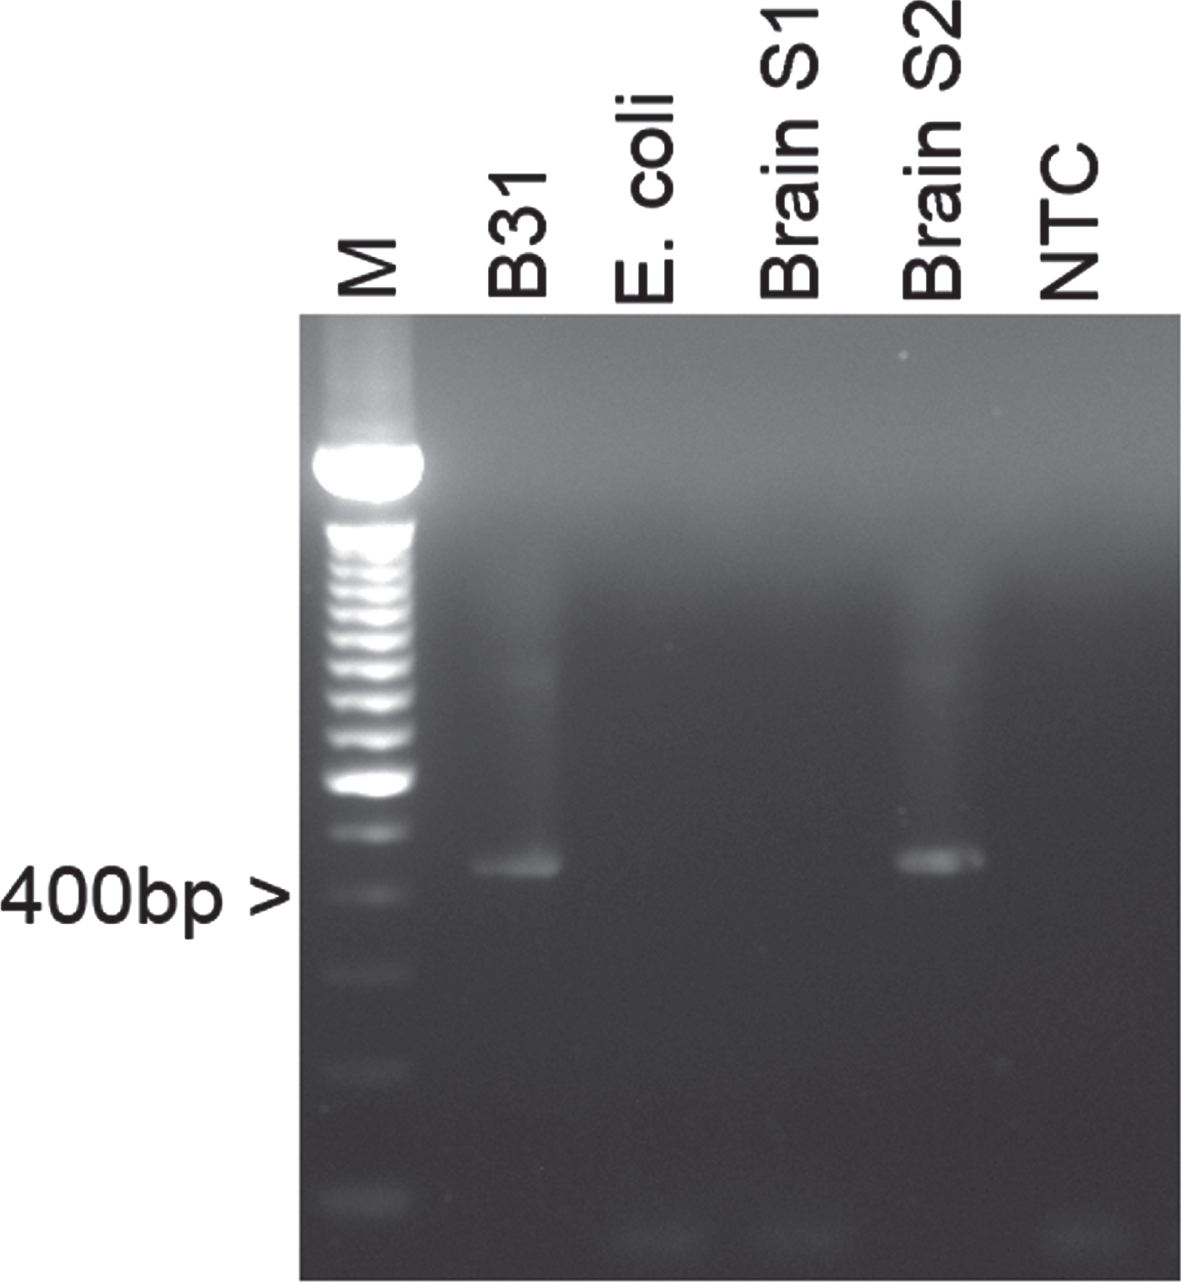 Representative agarose gel image of a B. burgdorferi specific 16S rDNA PCR amplification of genomic DNAs from brain autopsy tissues. Lane 1 : 1 kB DNA Ladder (Life Technologies), Lane 2: Extracted genomic DNA from B. burgdorferi B31 laboratory strain, Lane 3: Genomic E. coli DNA as a negative control, Lanes 4-5: Genomic DNA from human brain autopsy sections from the frontal lobe (S1) and the hypothalamus area (S2), Lane 6: No template control.